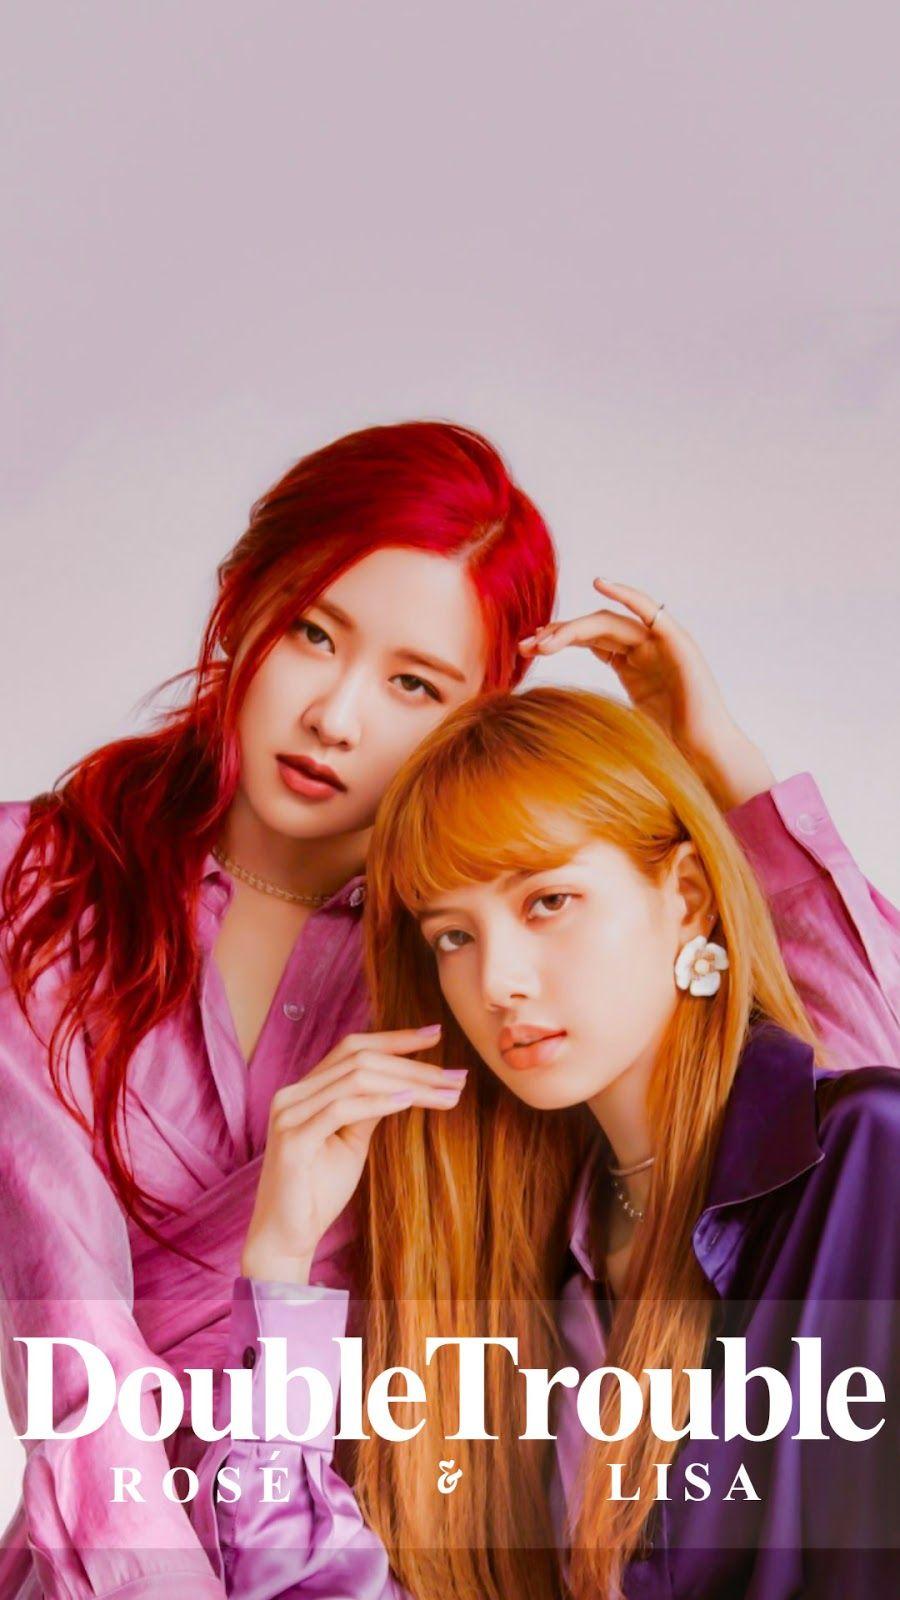 Rosé & Lisa BLACKPINK Have Finished Filming Their Solo MVs ...